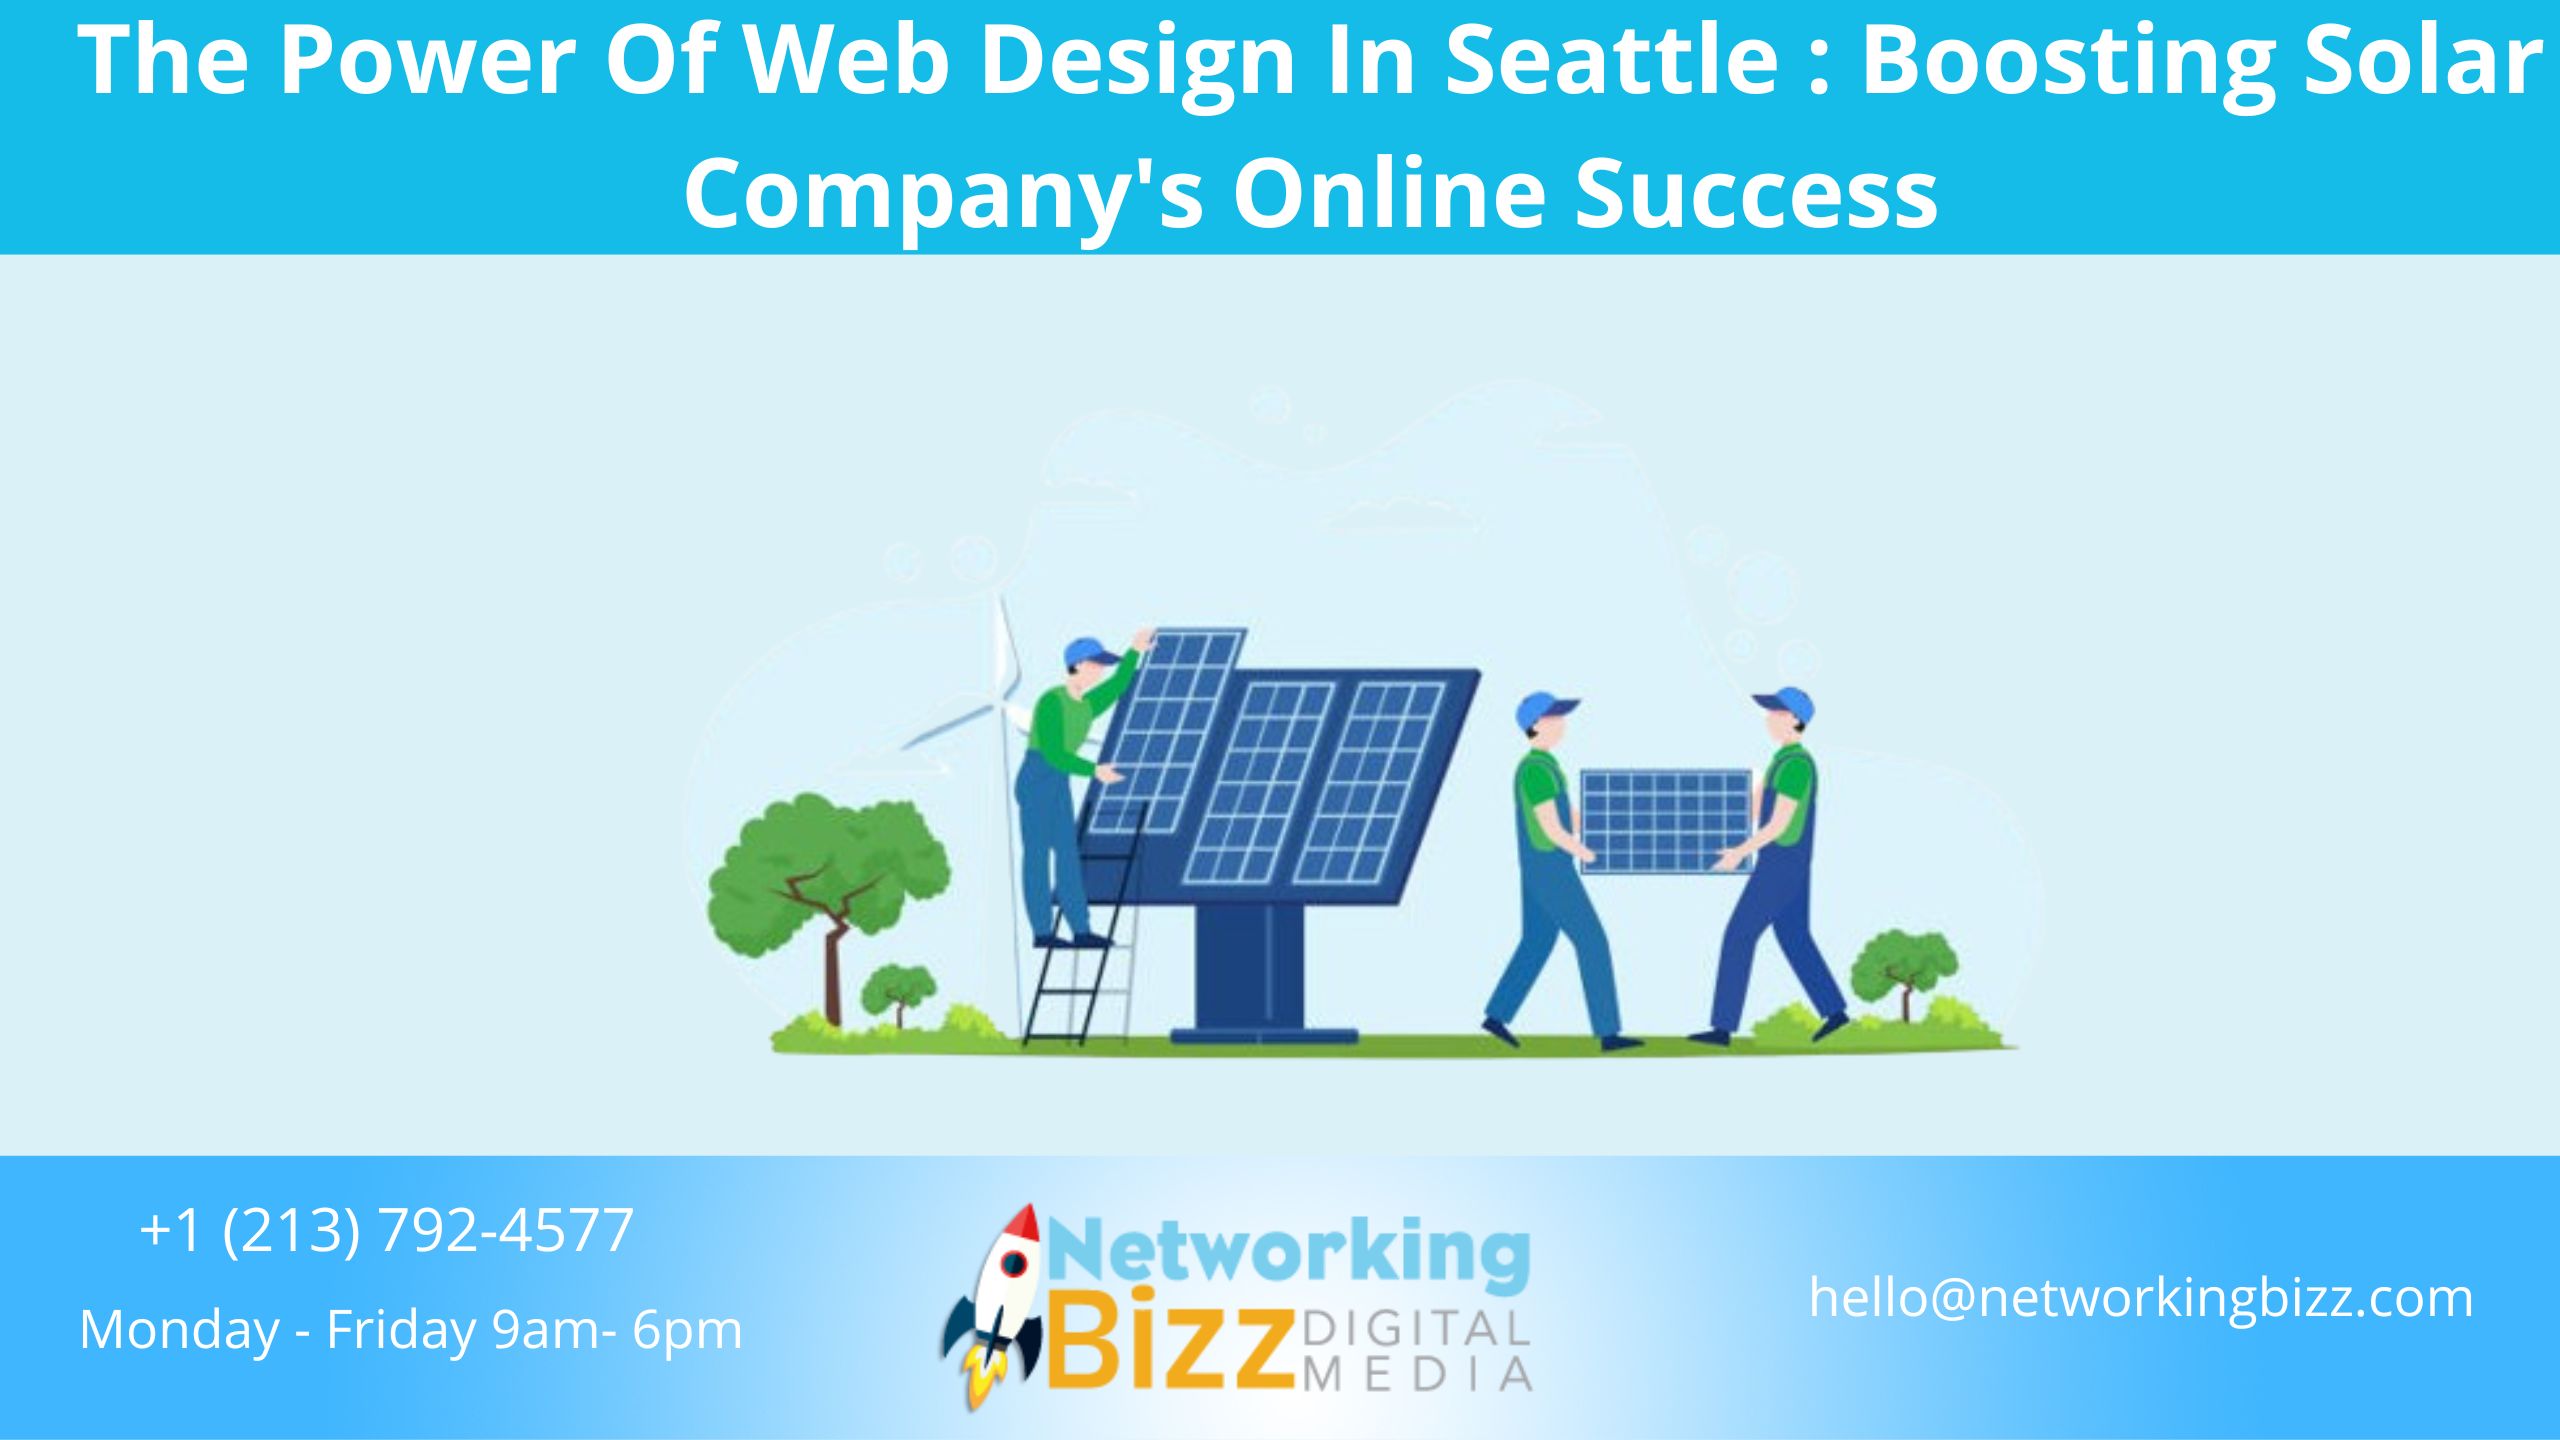 The Power Of Web Design In Seattle : Boosting Solar Company’s Online Success